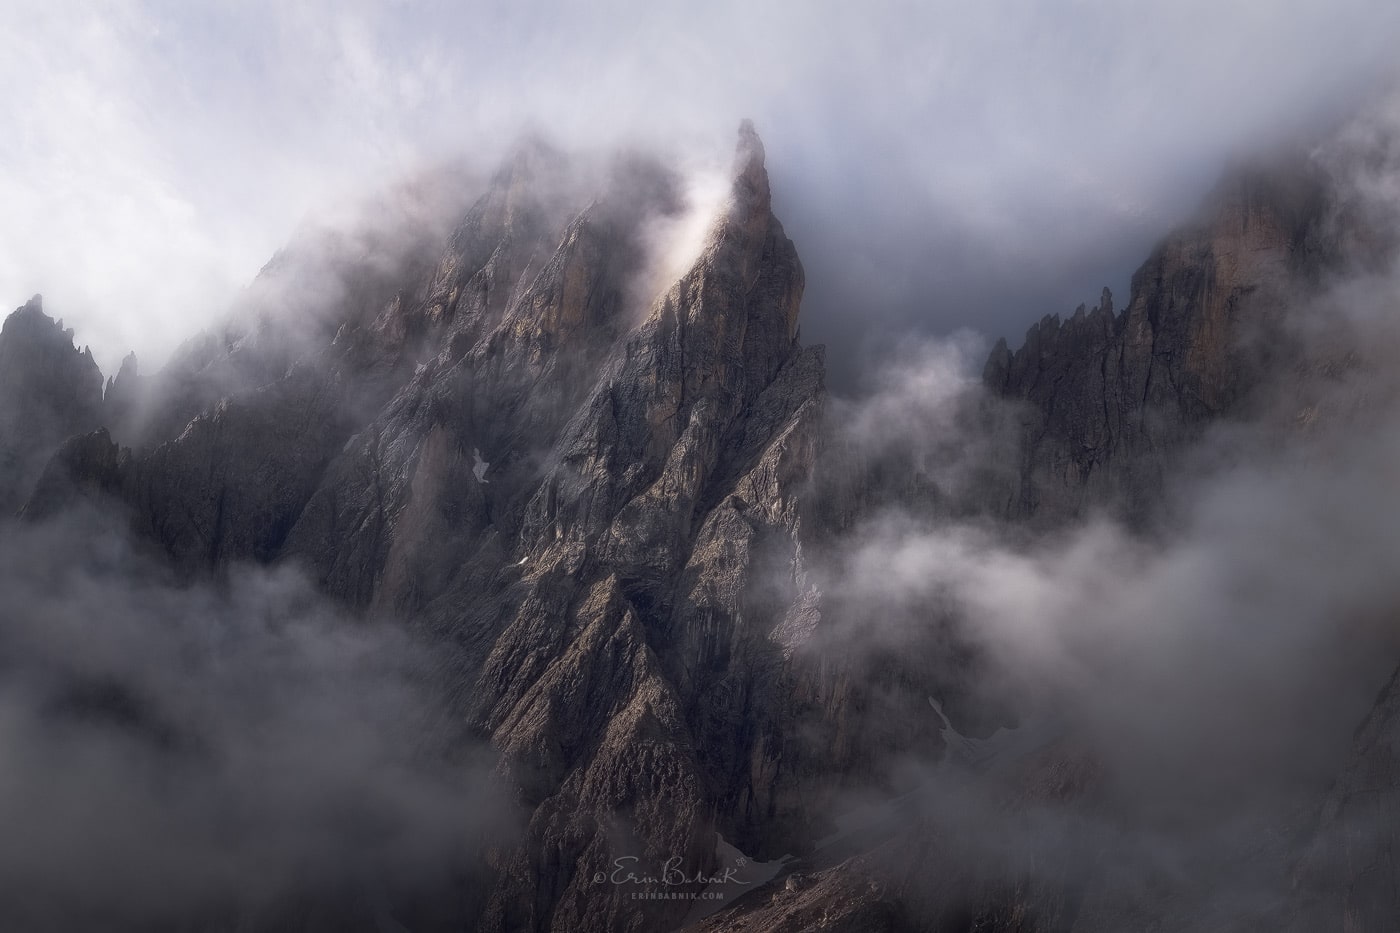 Adventure in the Dolomites, Early Summer 2022 - Photography Workshops by Erin Babnik